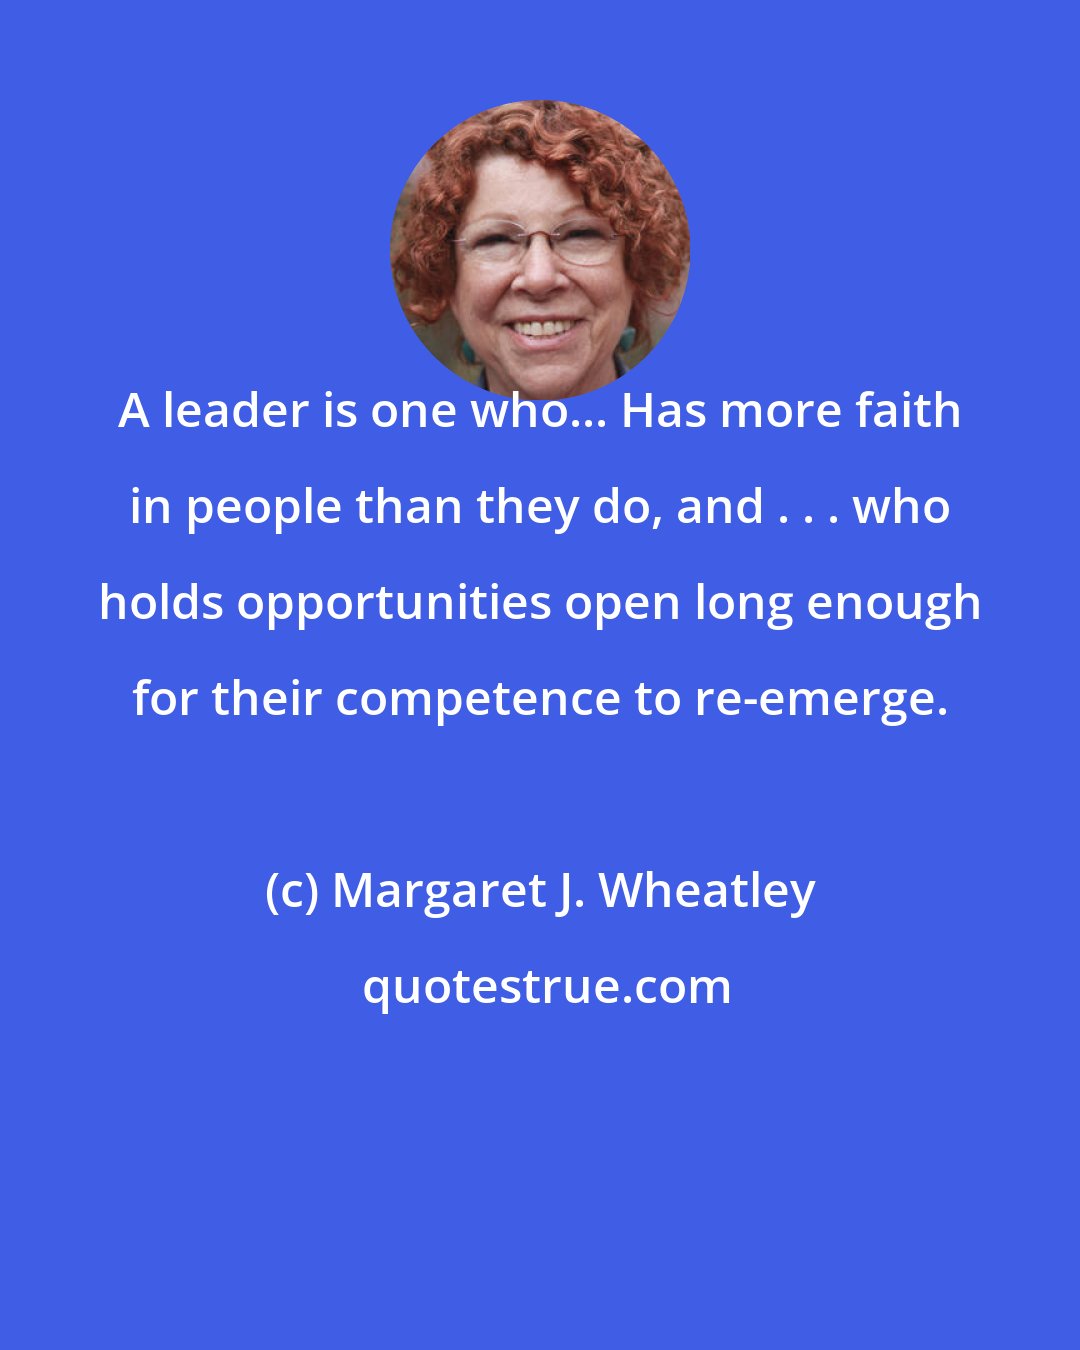 Margaret J. Wheatley: A leader is one who... Has more faith in people than they do, and . . . who holds opportunities open long enough for their competence to re-emerge.